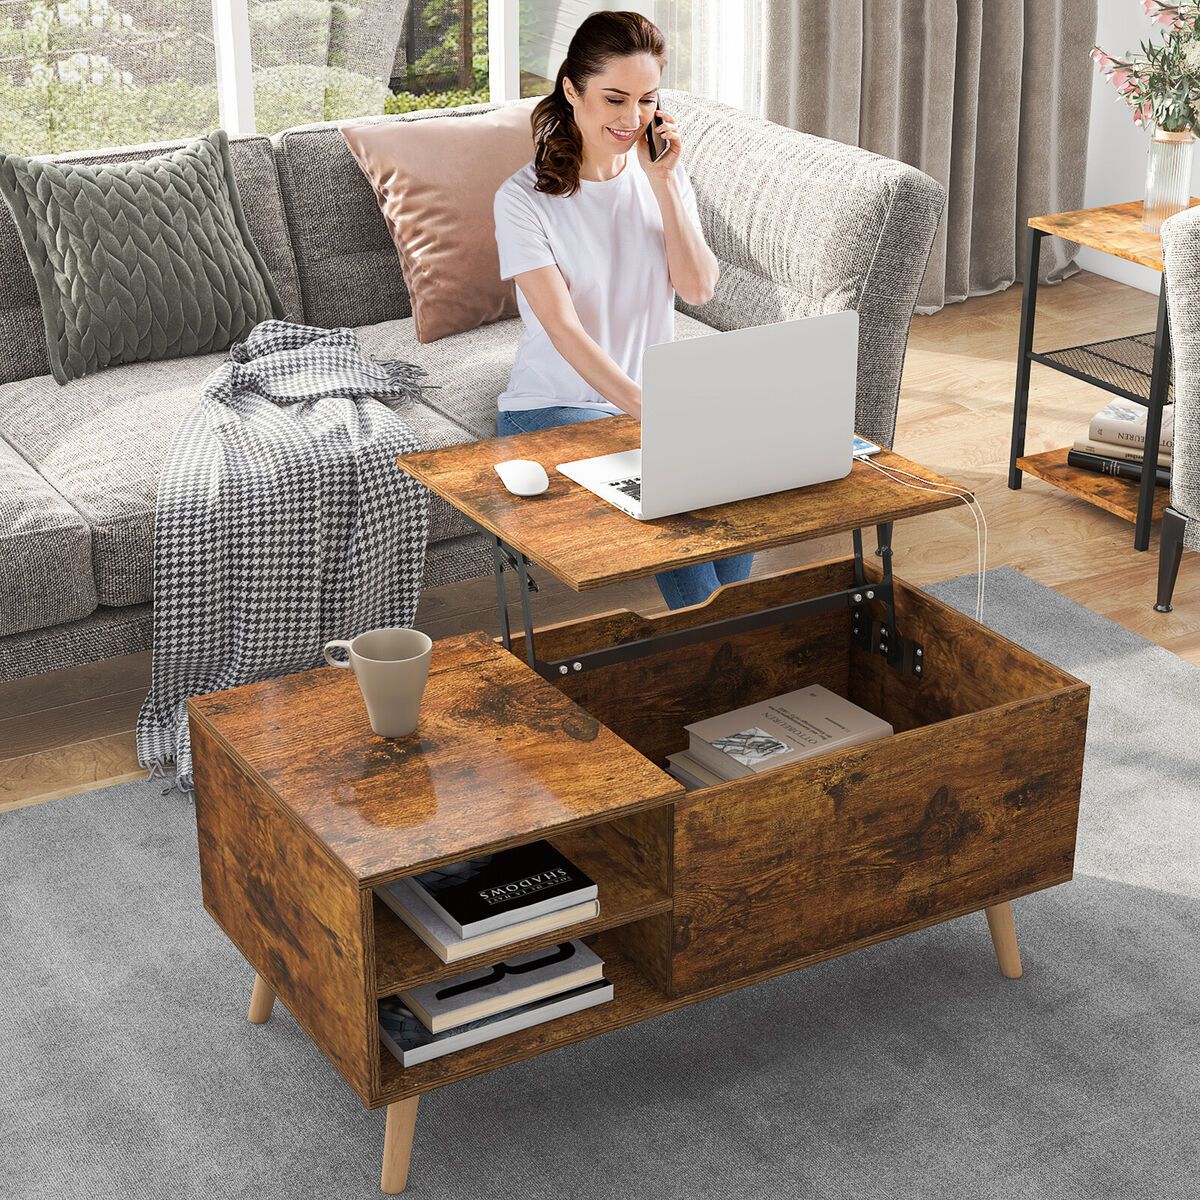 Lift Top Coffee Table W/ Hidden Storage Shelf Usb Charging Living Room  Furniture | Ebay Intended For Coffee Tables With Hidden Compartments (View 13 of 15)